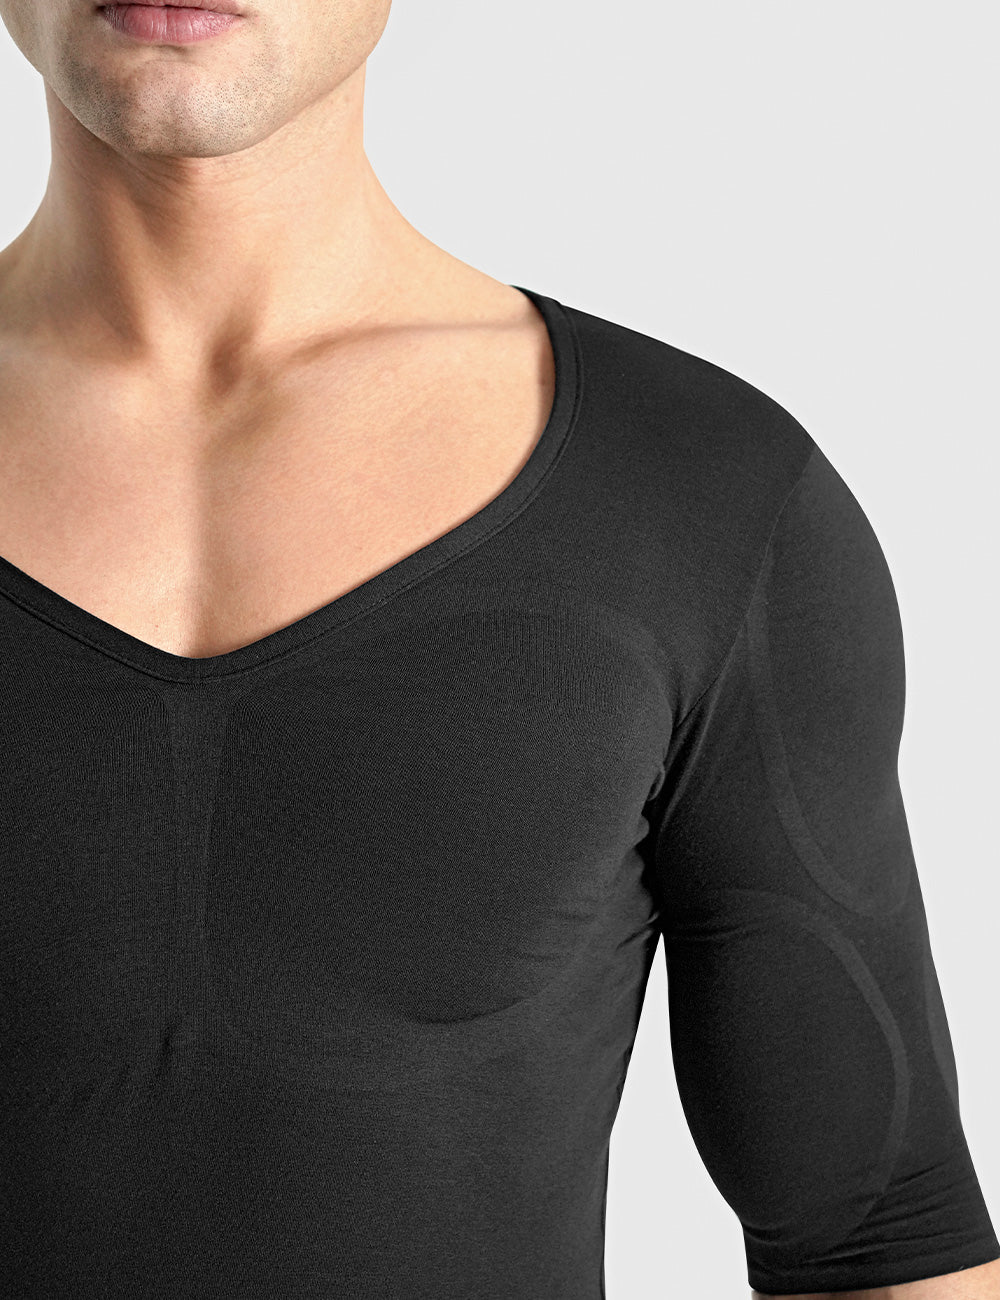 STEALTH Padded Muscle Shirt